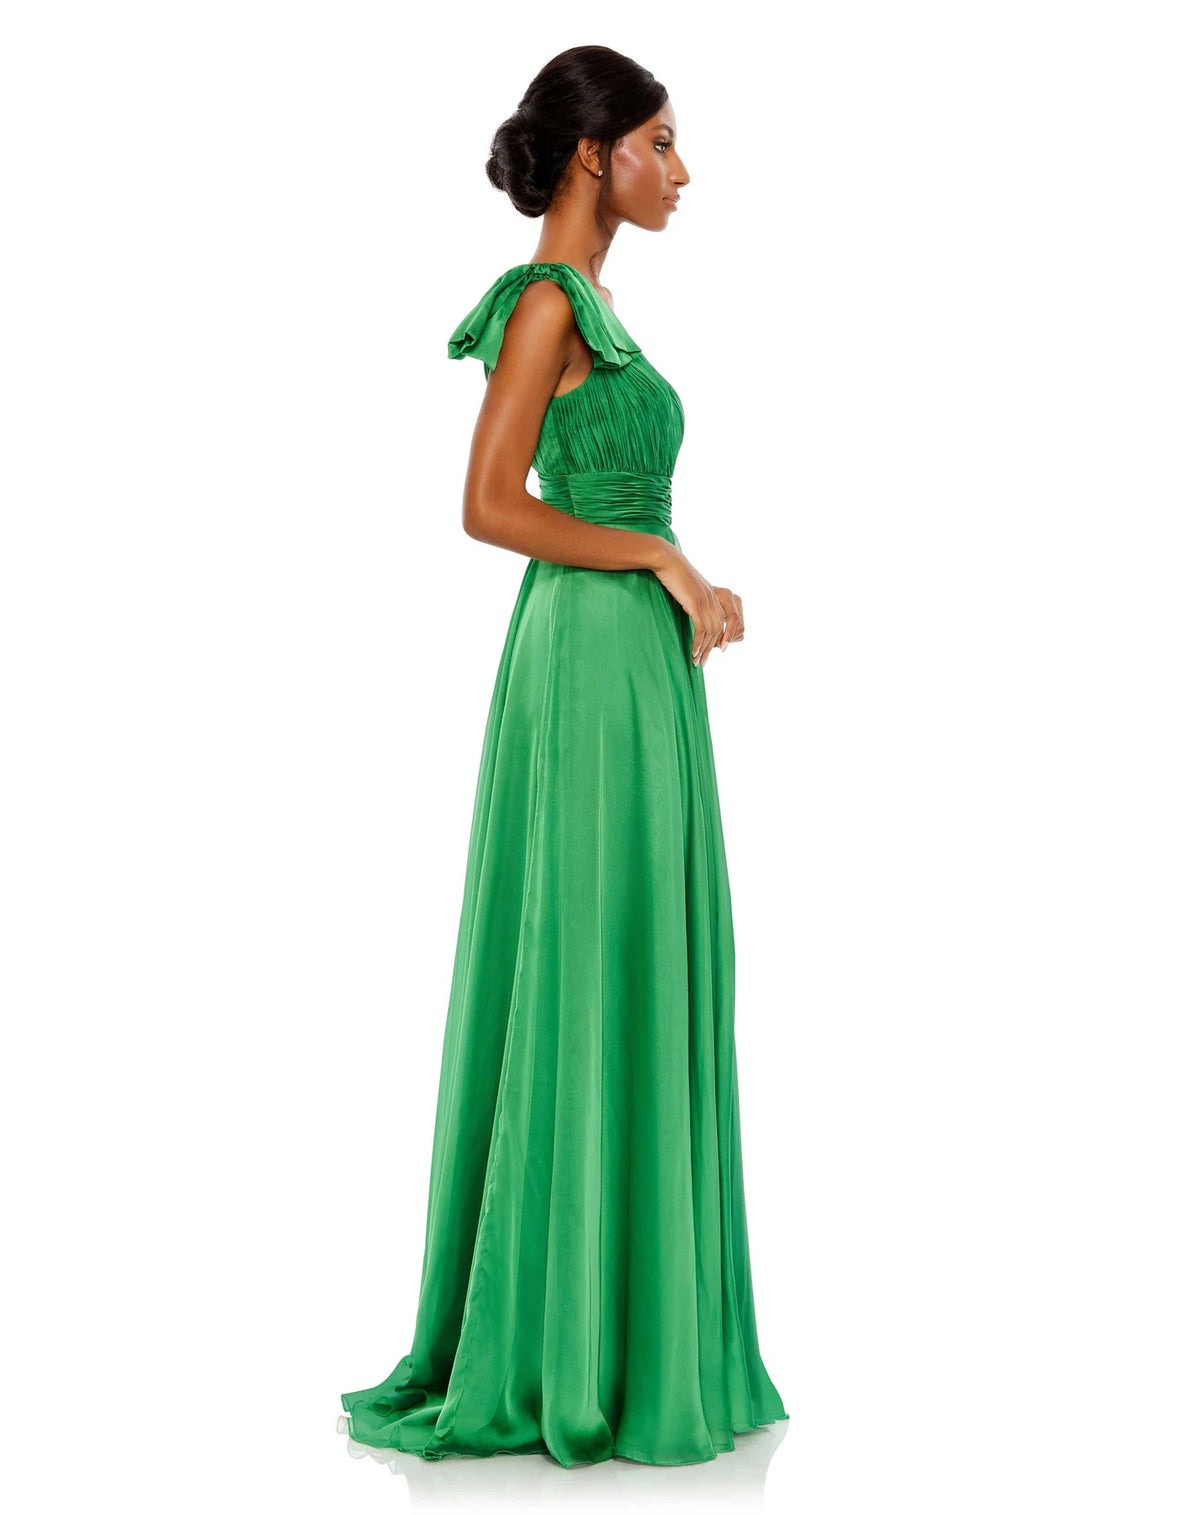 This elegant Mac Duggal one-sleeved emerald green, dress is a stunning formal gown for special occasions. With beautiful draped asymmetric detail across one shoulder and an empire bust together with a flower skirt, this elegant gown will truly have you feeling like the belle of the ball side view